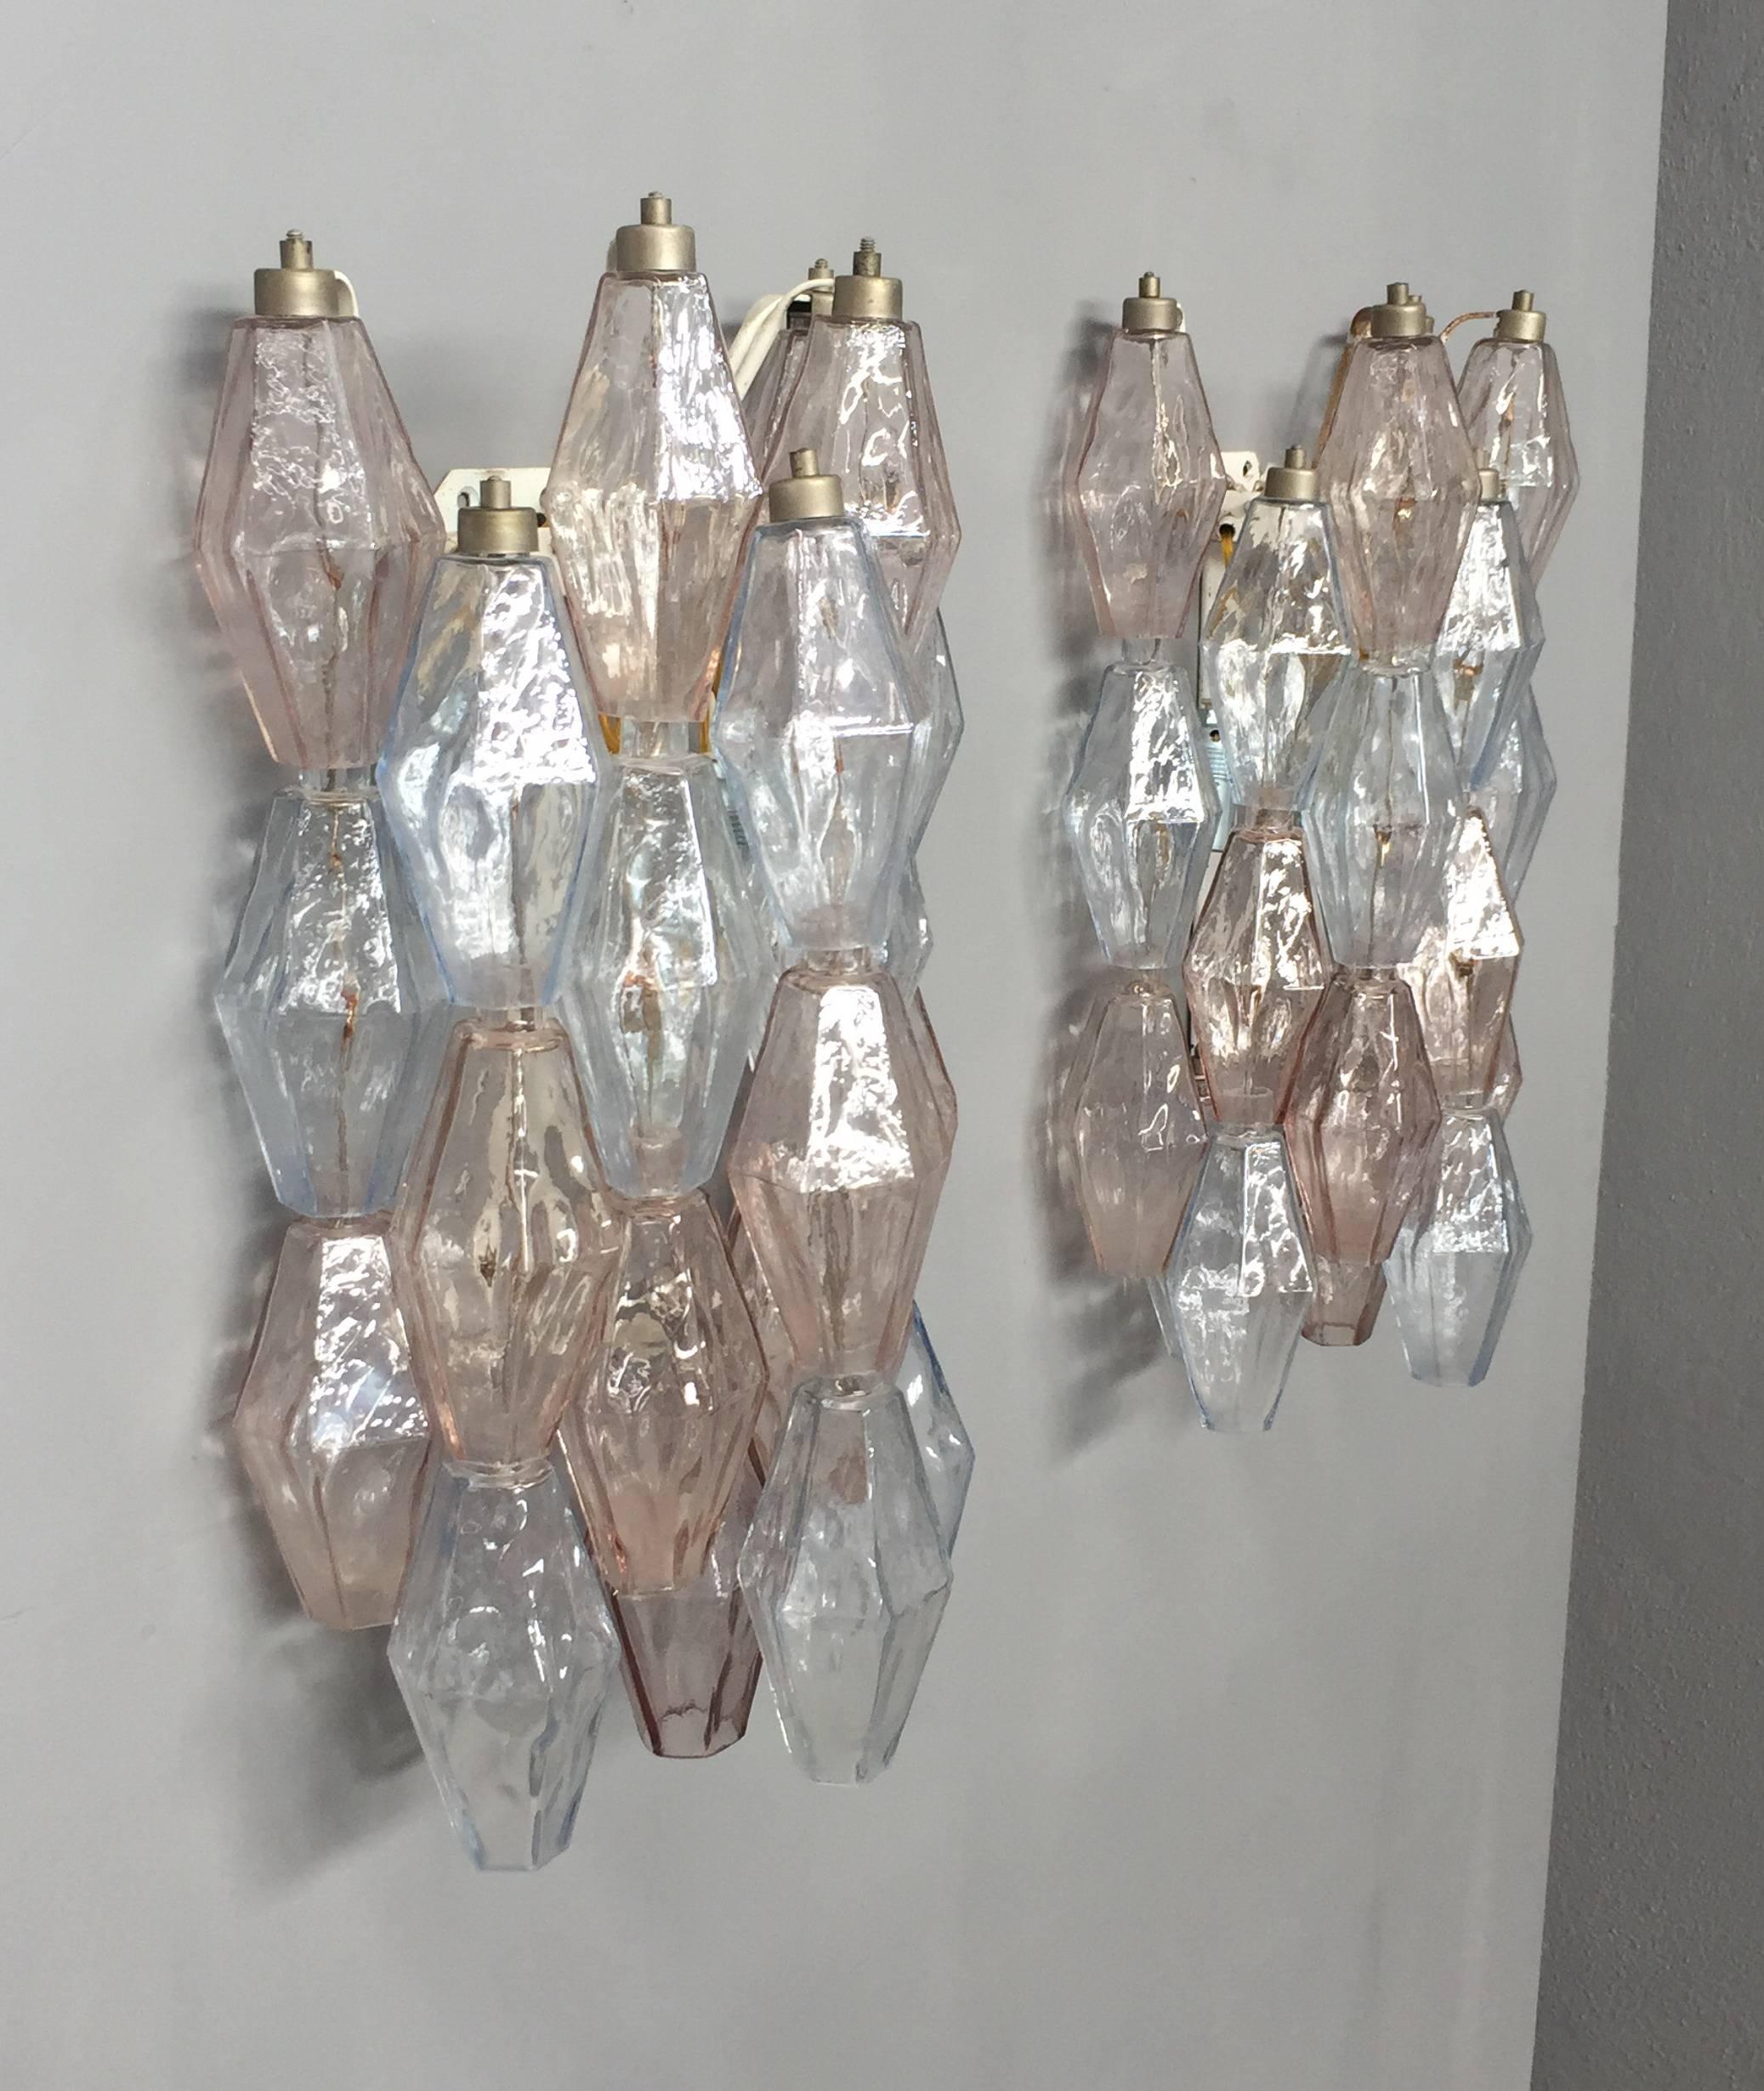 Clear, pink and light blue handblown Murano glass sconces.
Three lights each sconce.